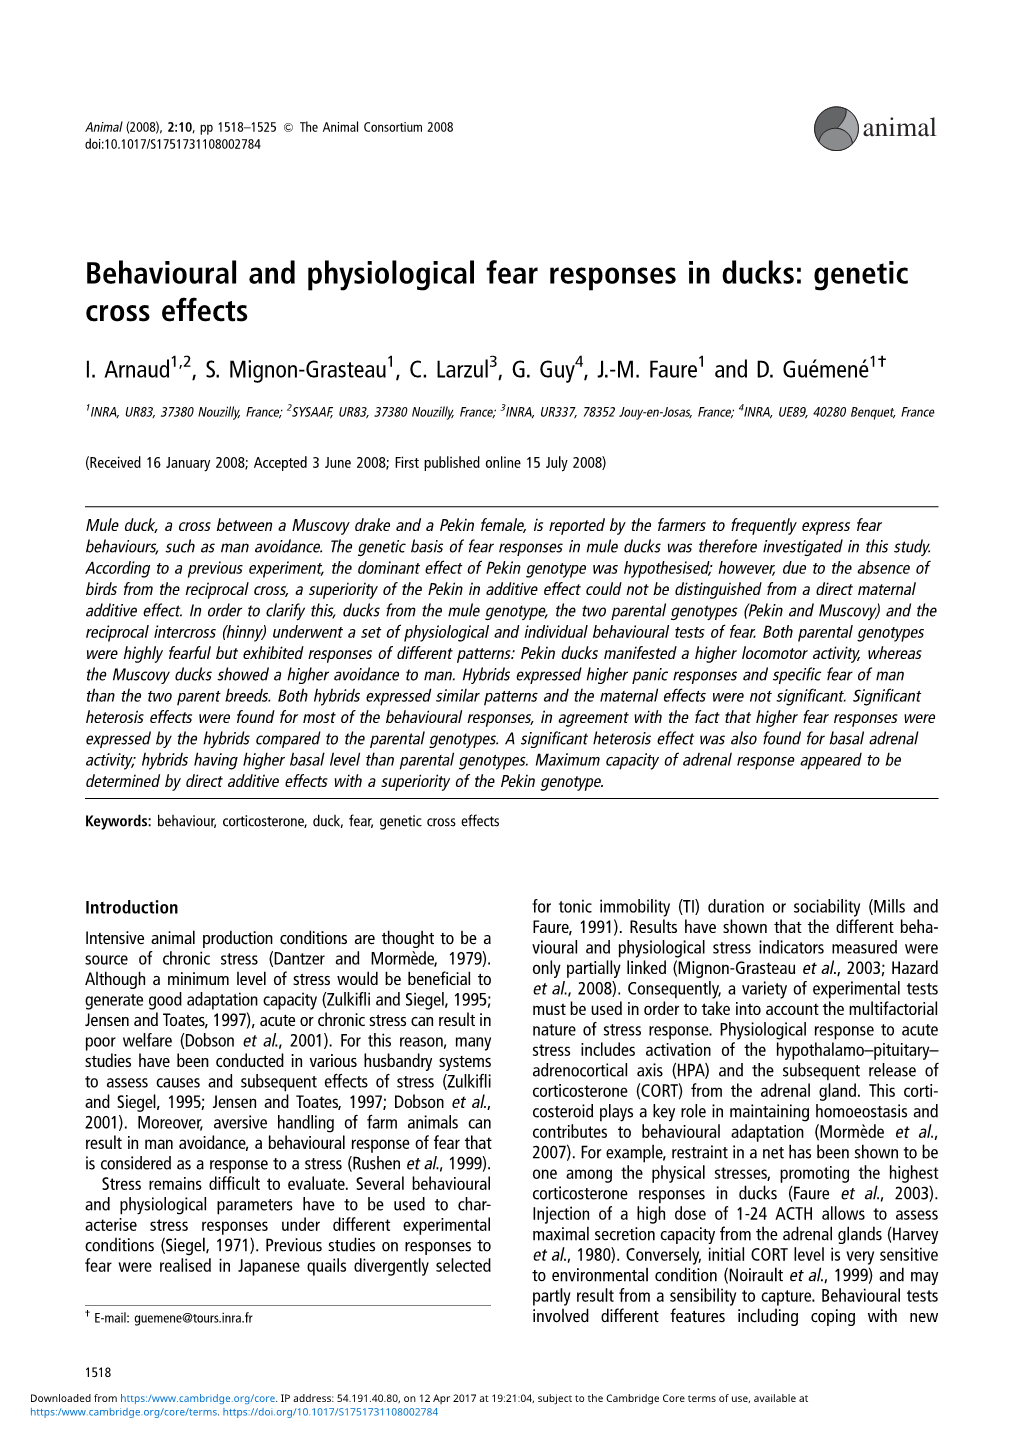 Behavioural and Physiological Fear Responses in Ducks: Genetic Cross Effects